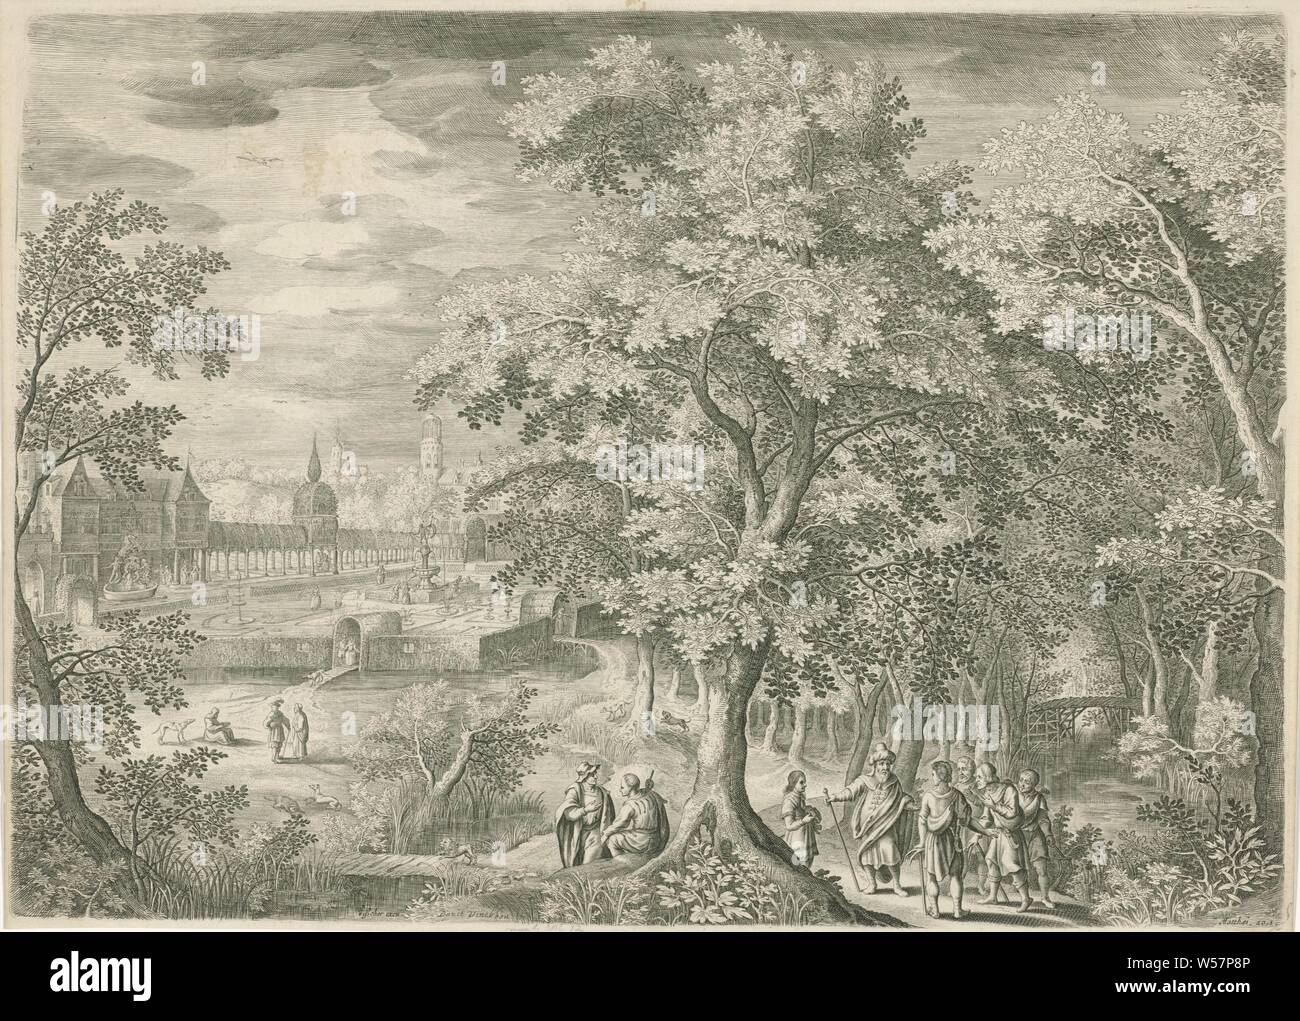 Wooded landscape with the parable of the workers in the vineyard, Wooded  landscape with a castle in the distance on the left and a landscaped garden  in which figures walk around. In